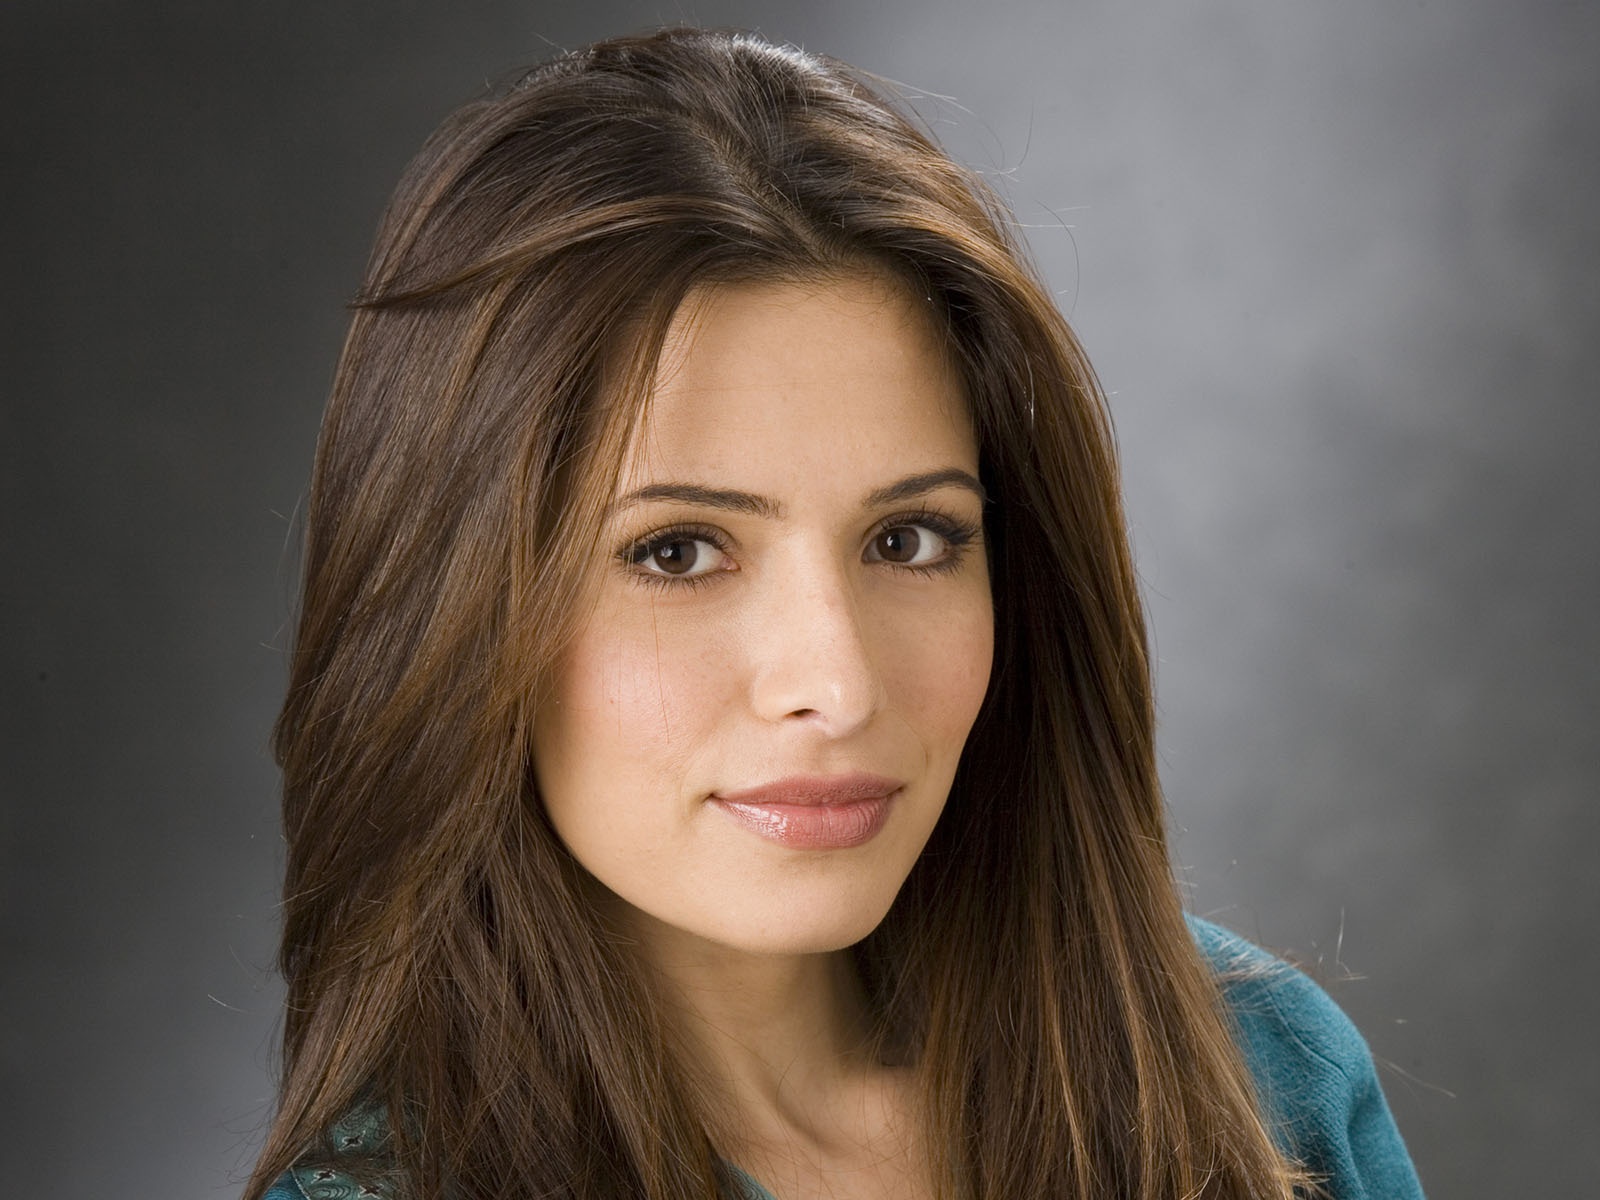 Pictures of Sarah Shahi | Celebrity Photography1600 x 1200